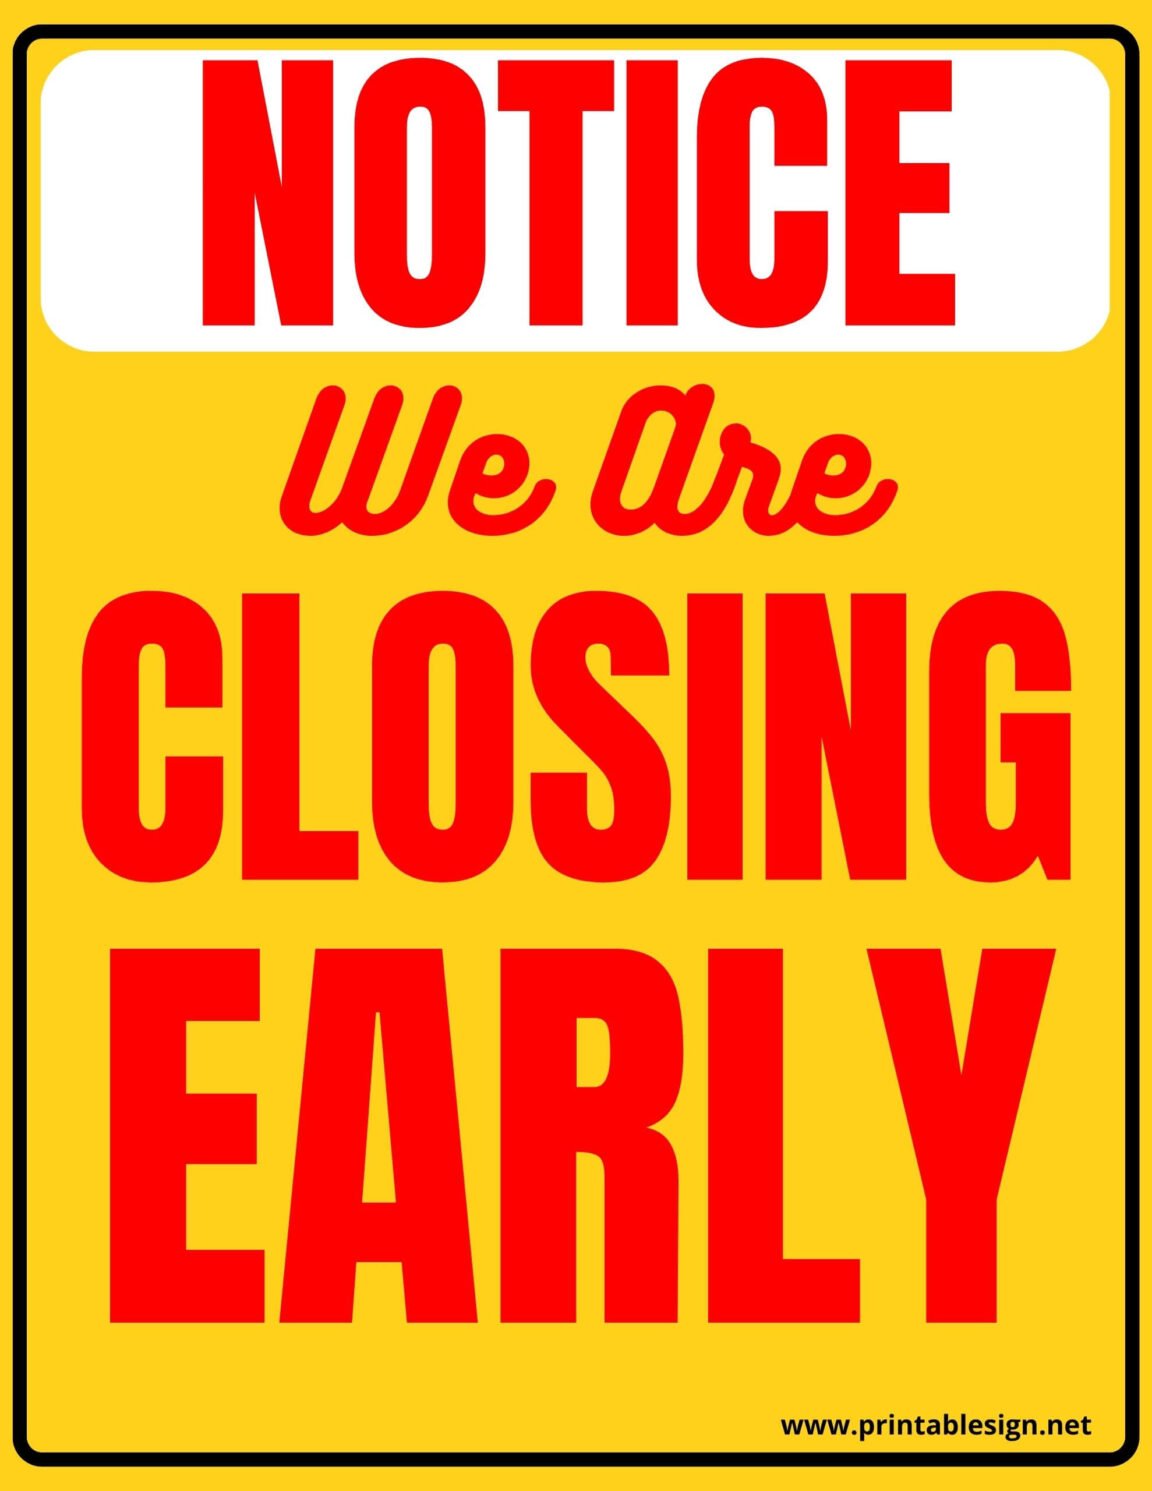 closing-early-notice-sign-free-download